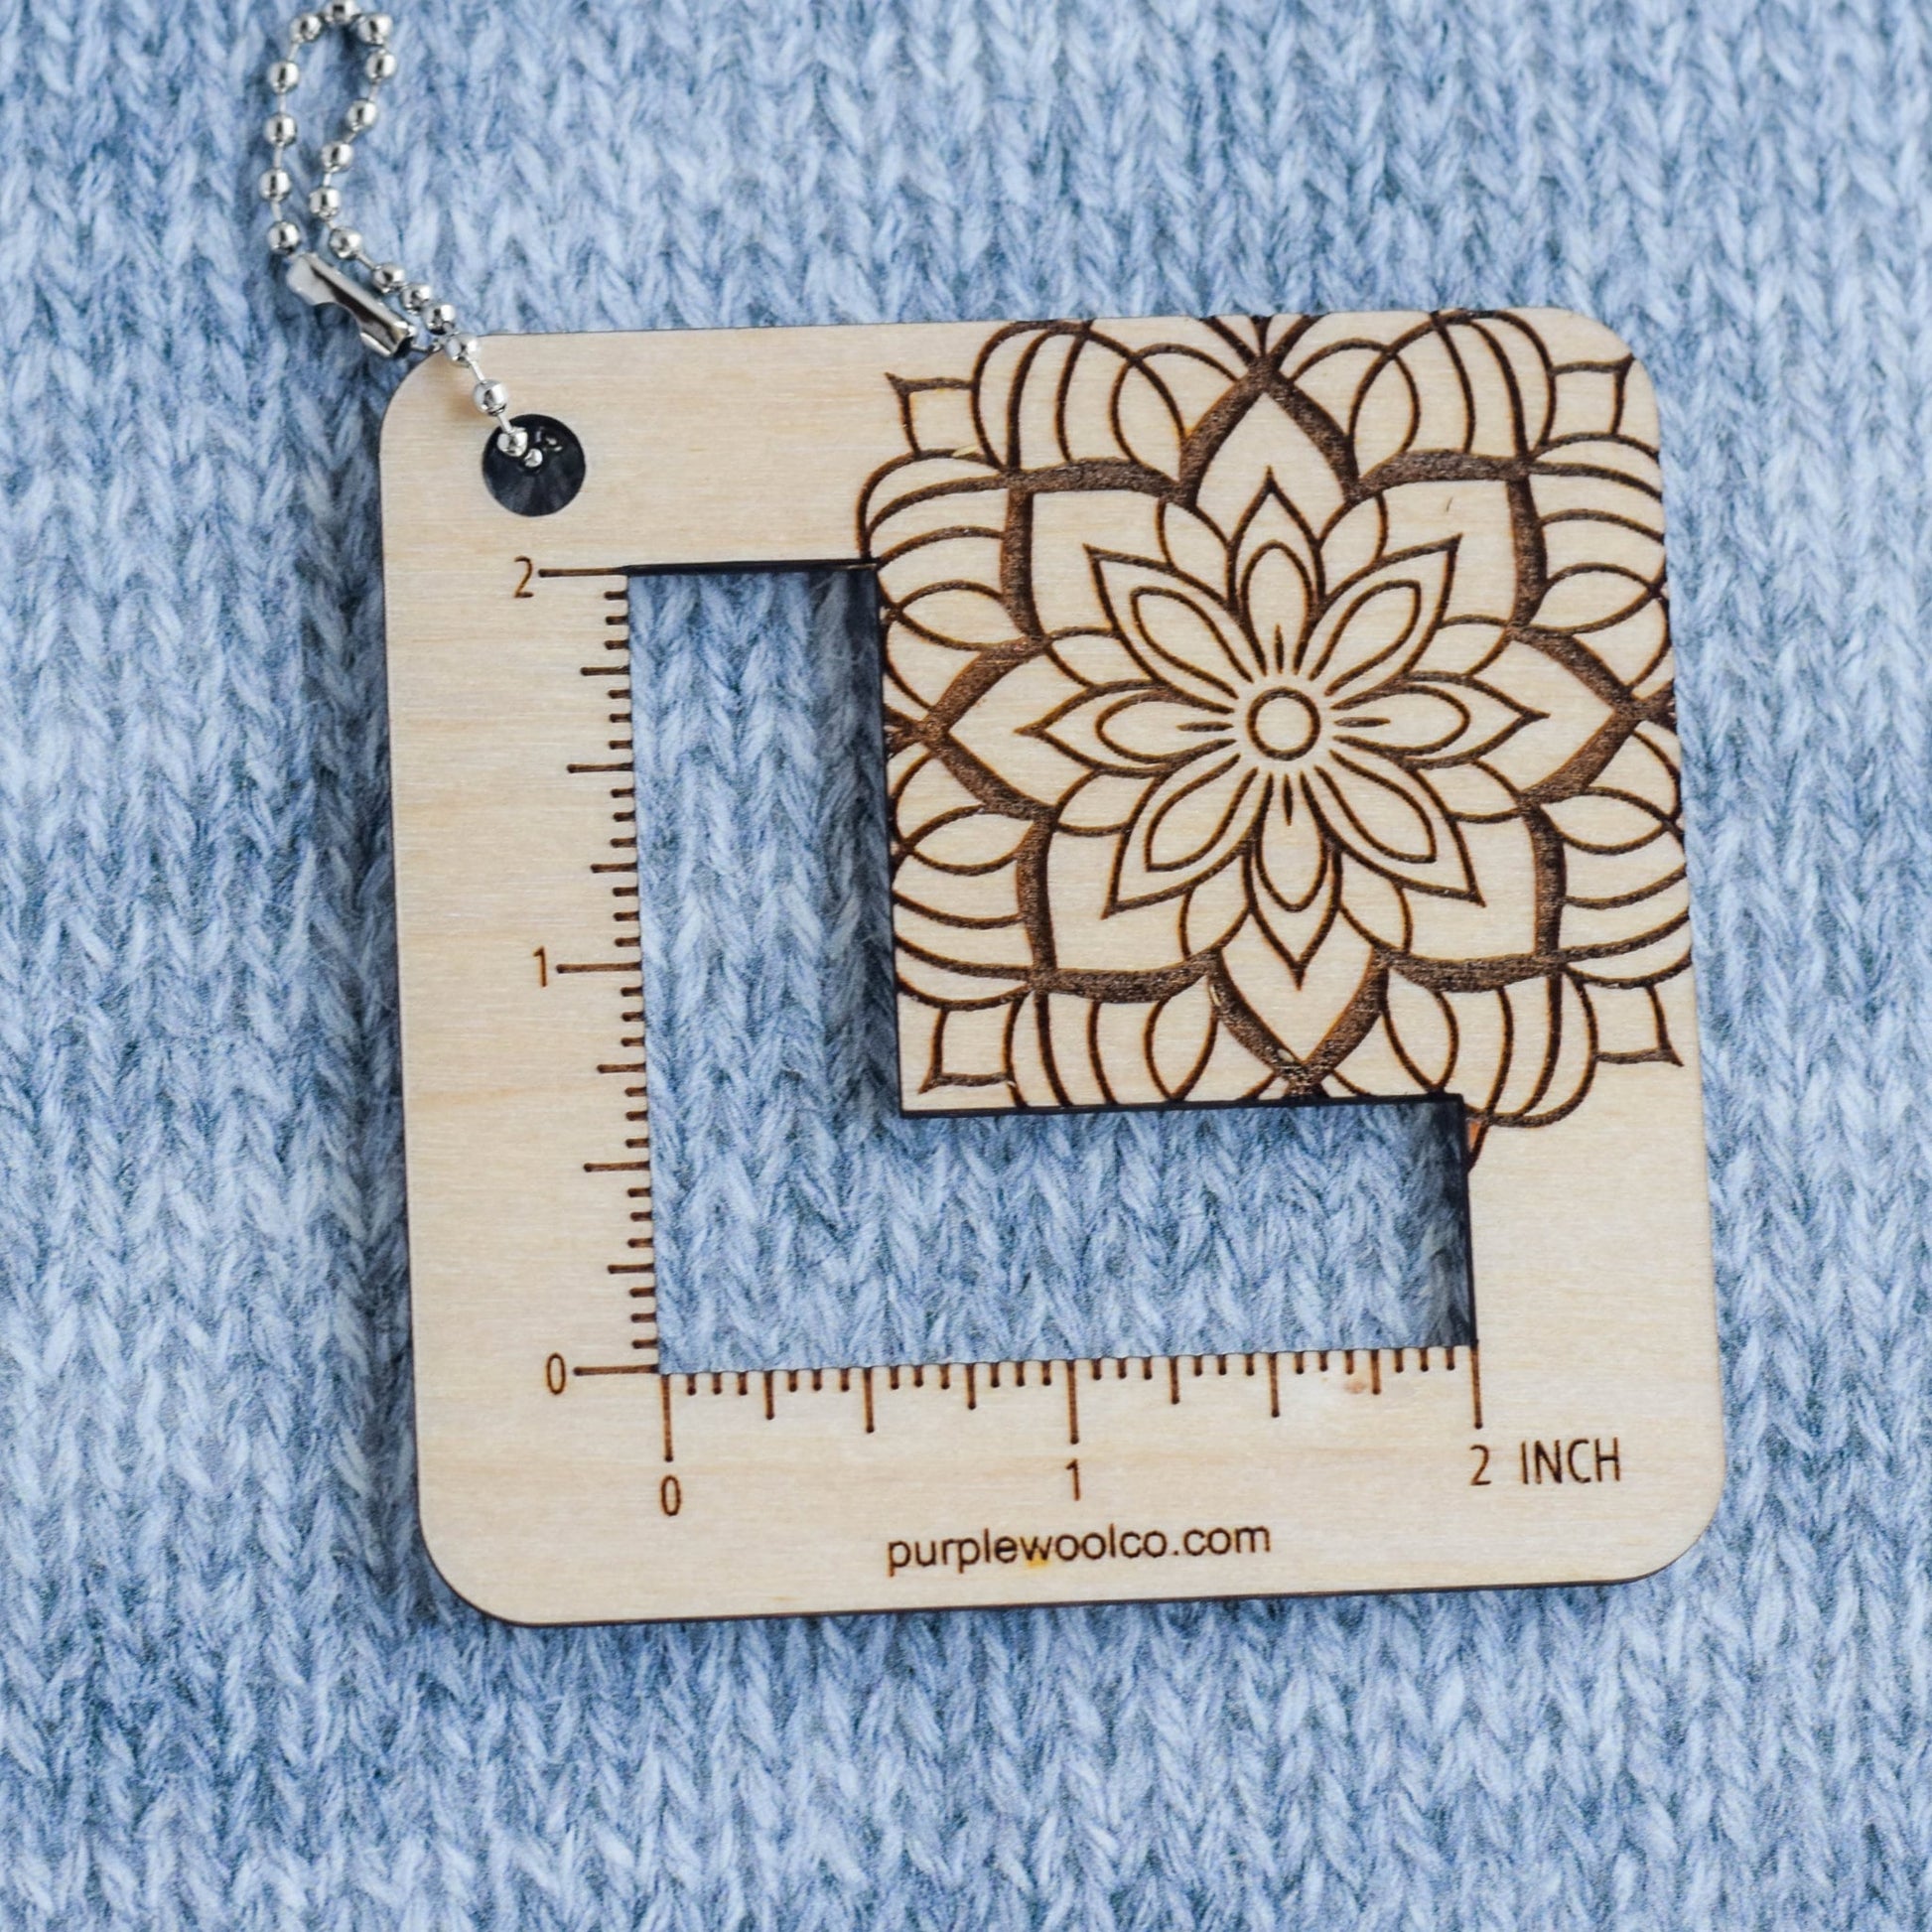 Knitting 2-inch Swatch Gauge - Mandala - Wood Knitting Accessories, Knitting Tools, Gifts for Knitters, Eco-Friendly Knitting